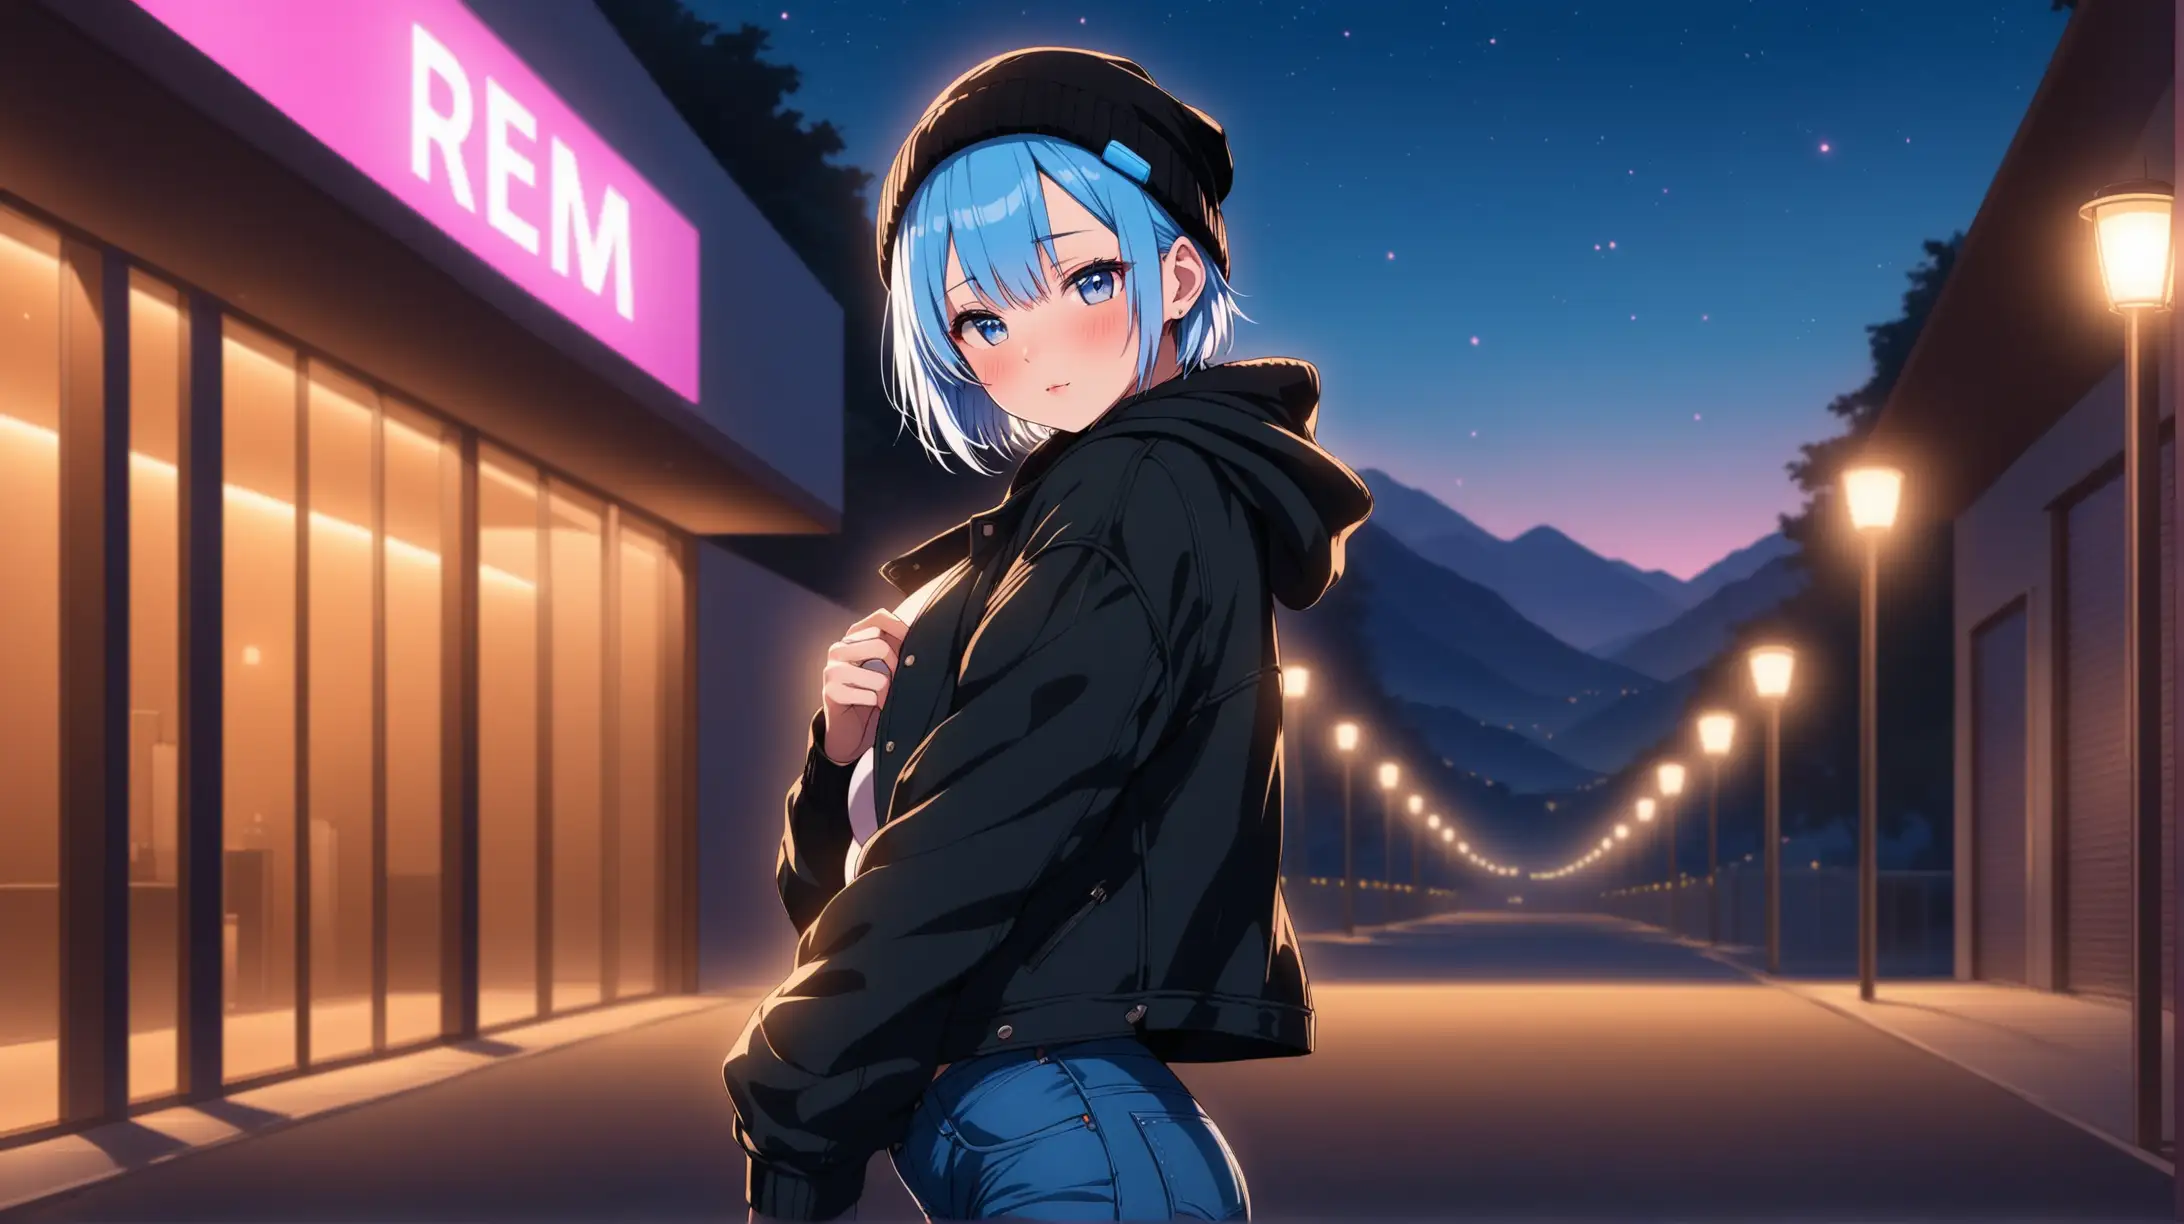 Draw the character Rem, high quality, ambient lighting, long shot, outdoors, seductive pose, wearing jeans and a jacket with a beanie, blushing